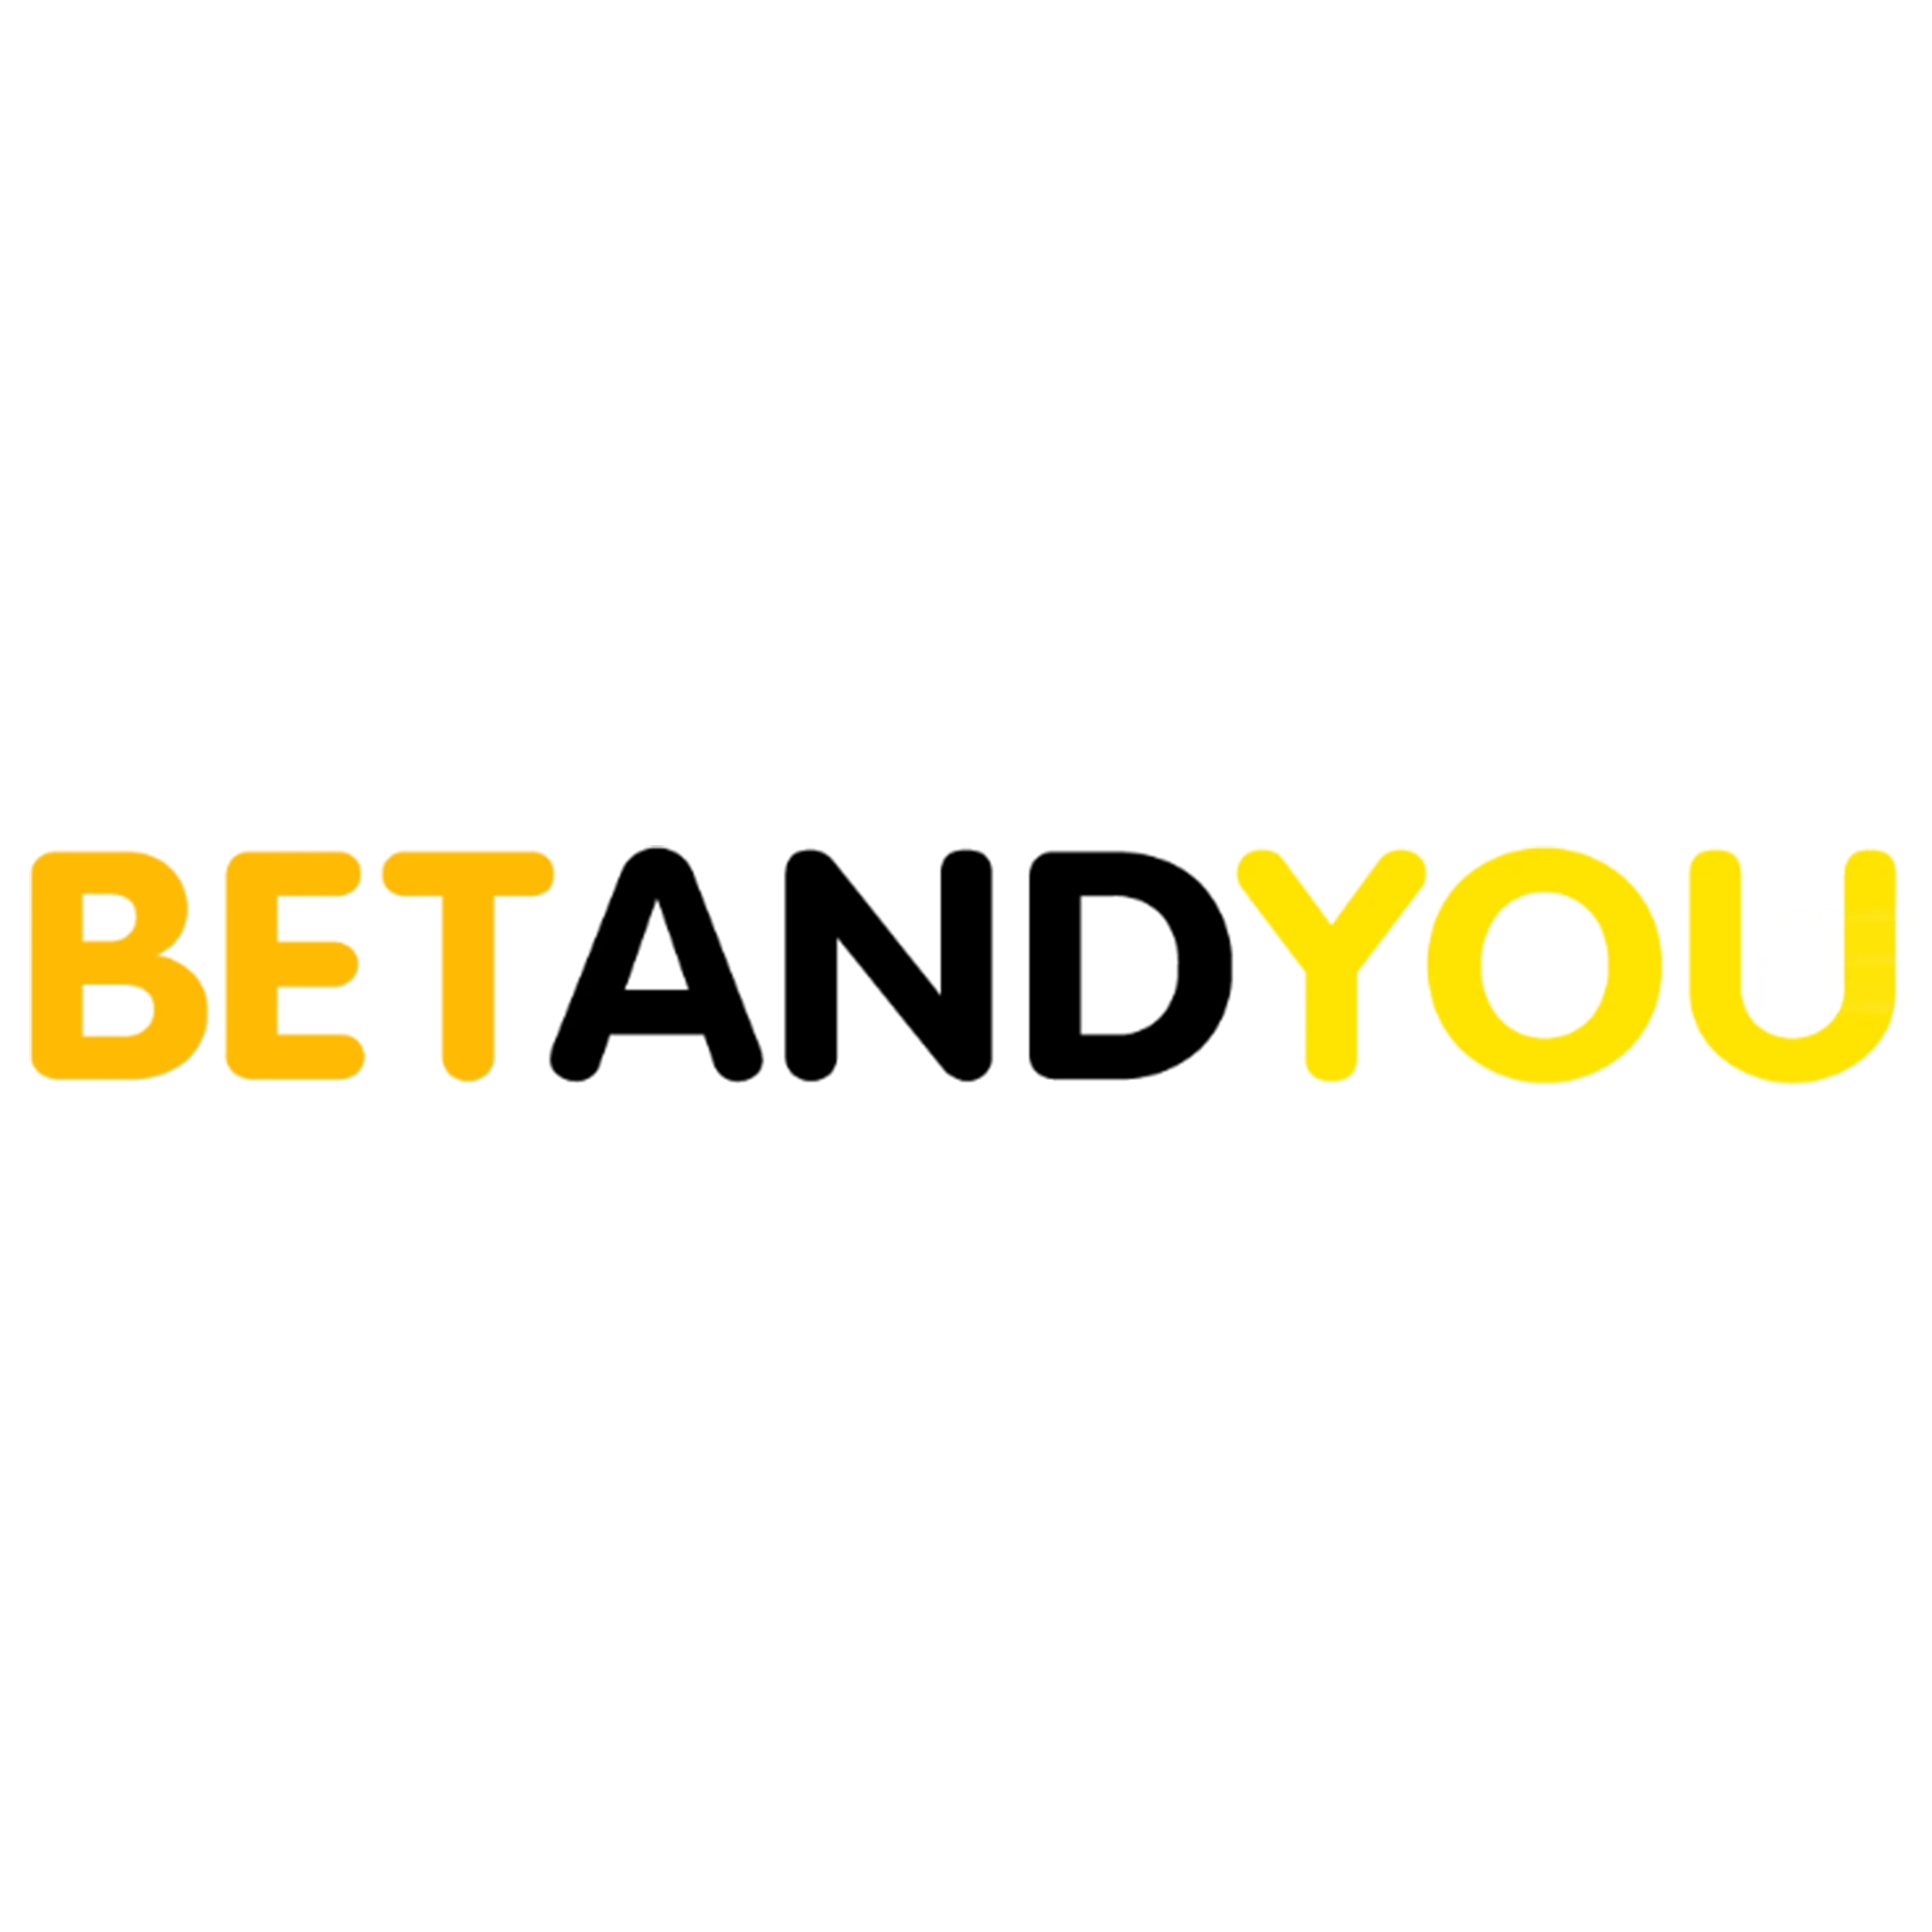 Start betting on cricket with Betandyou and get an impressive welcome bonus.